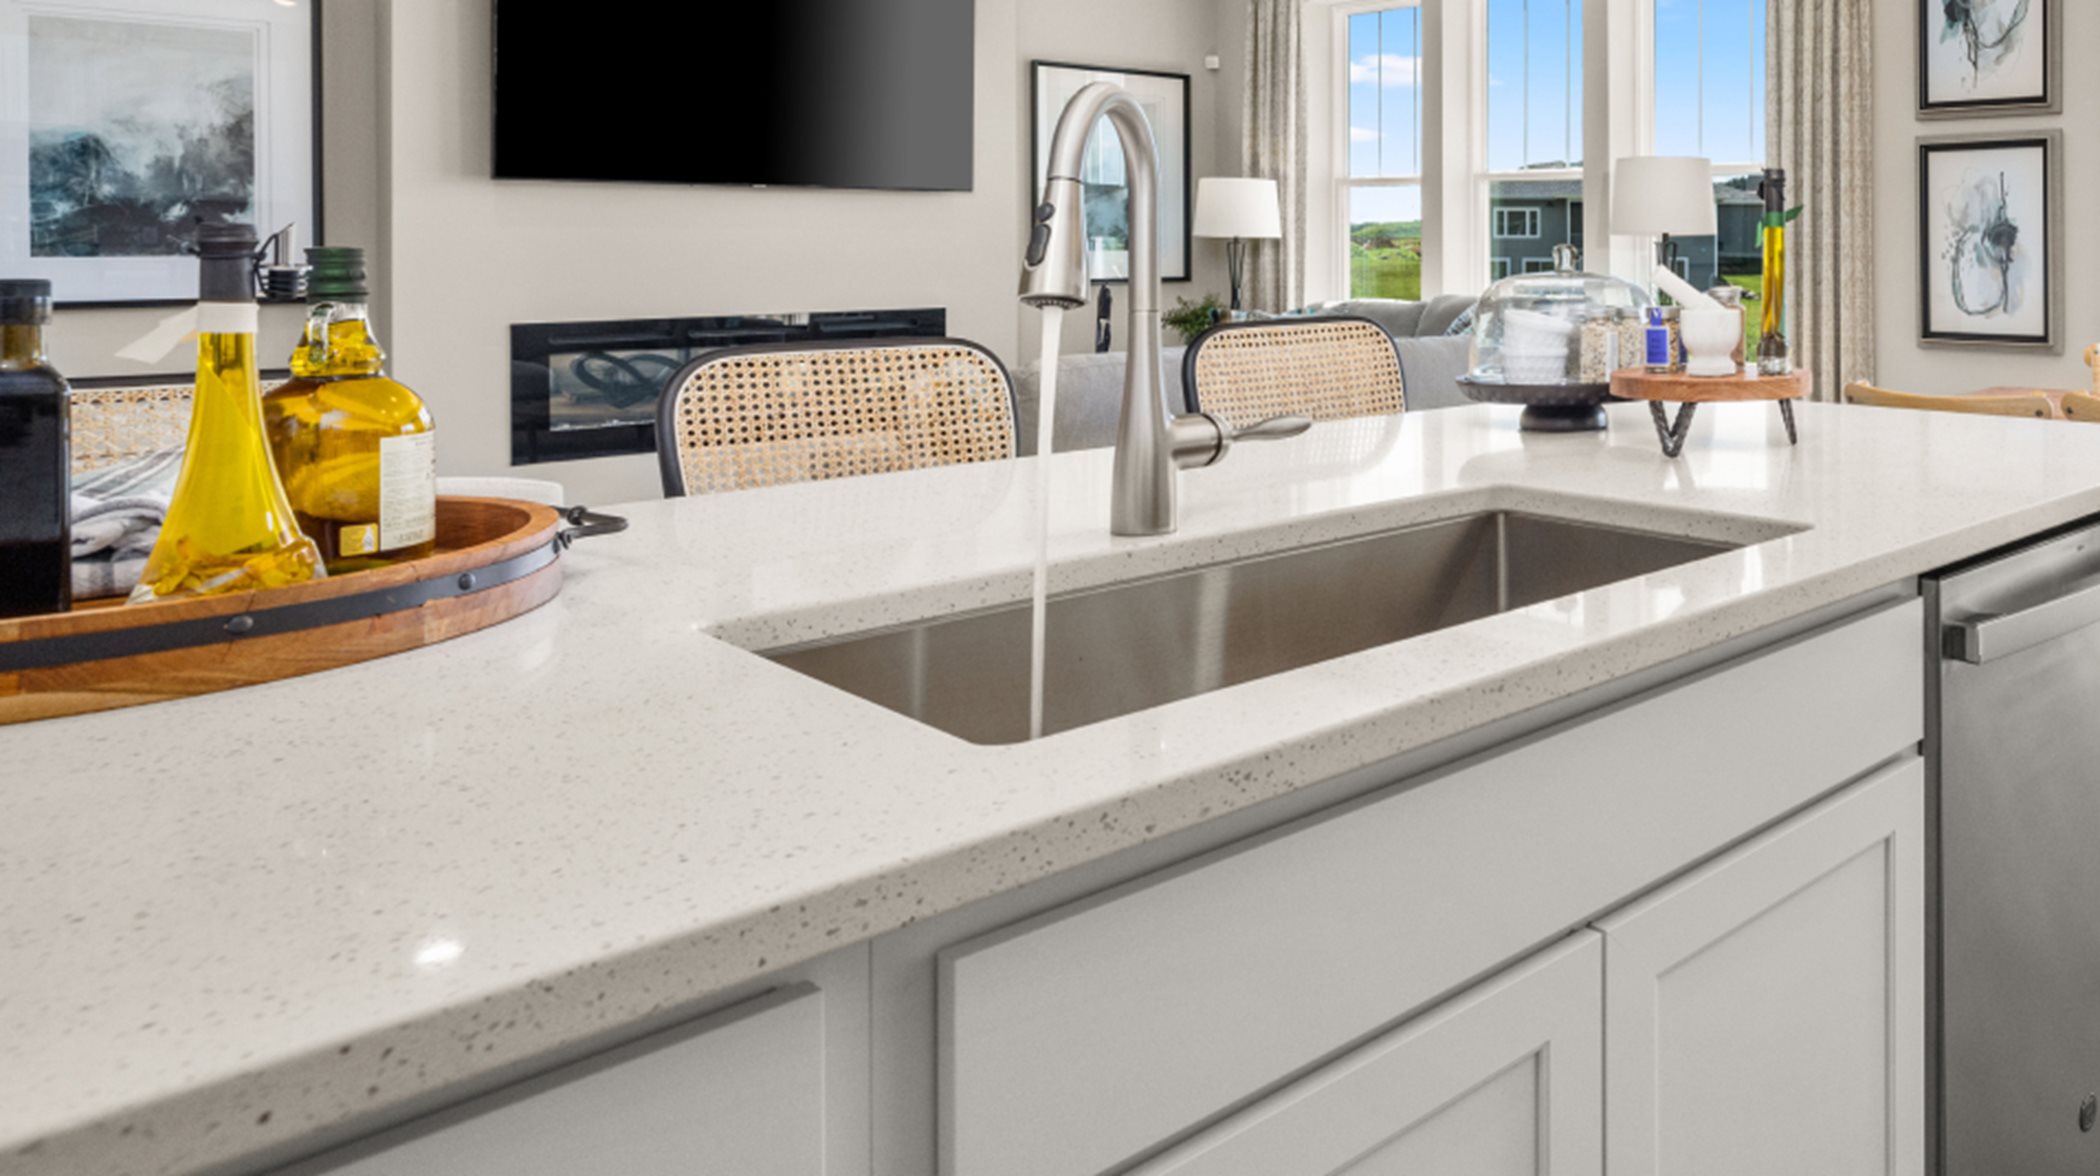 Undermount stainless steel sink and Moen faucet